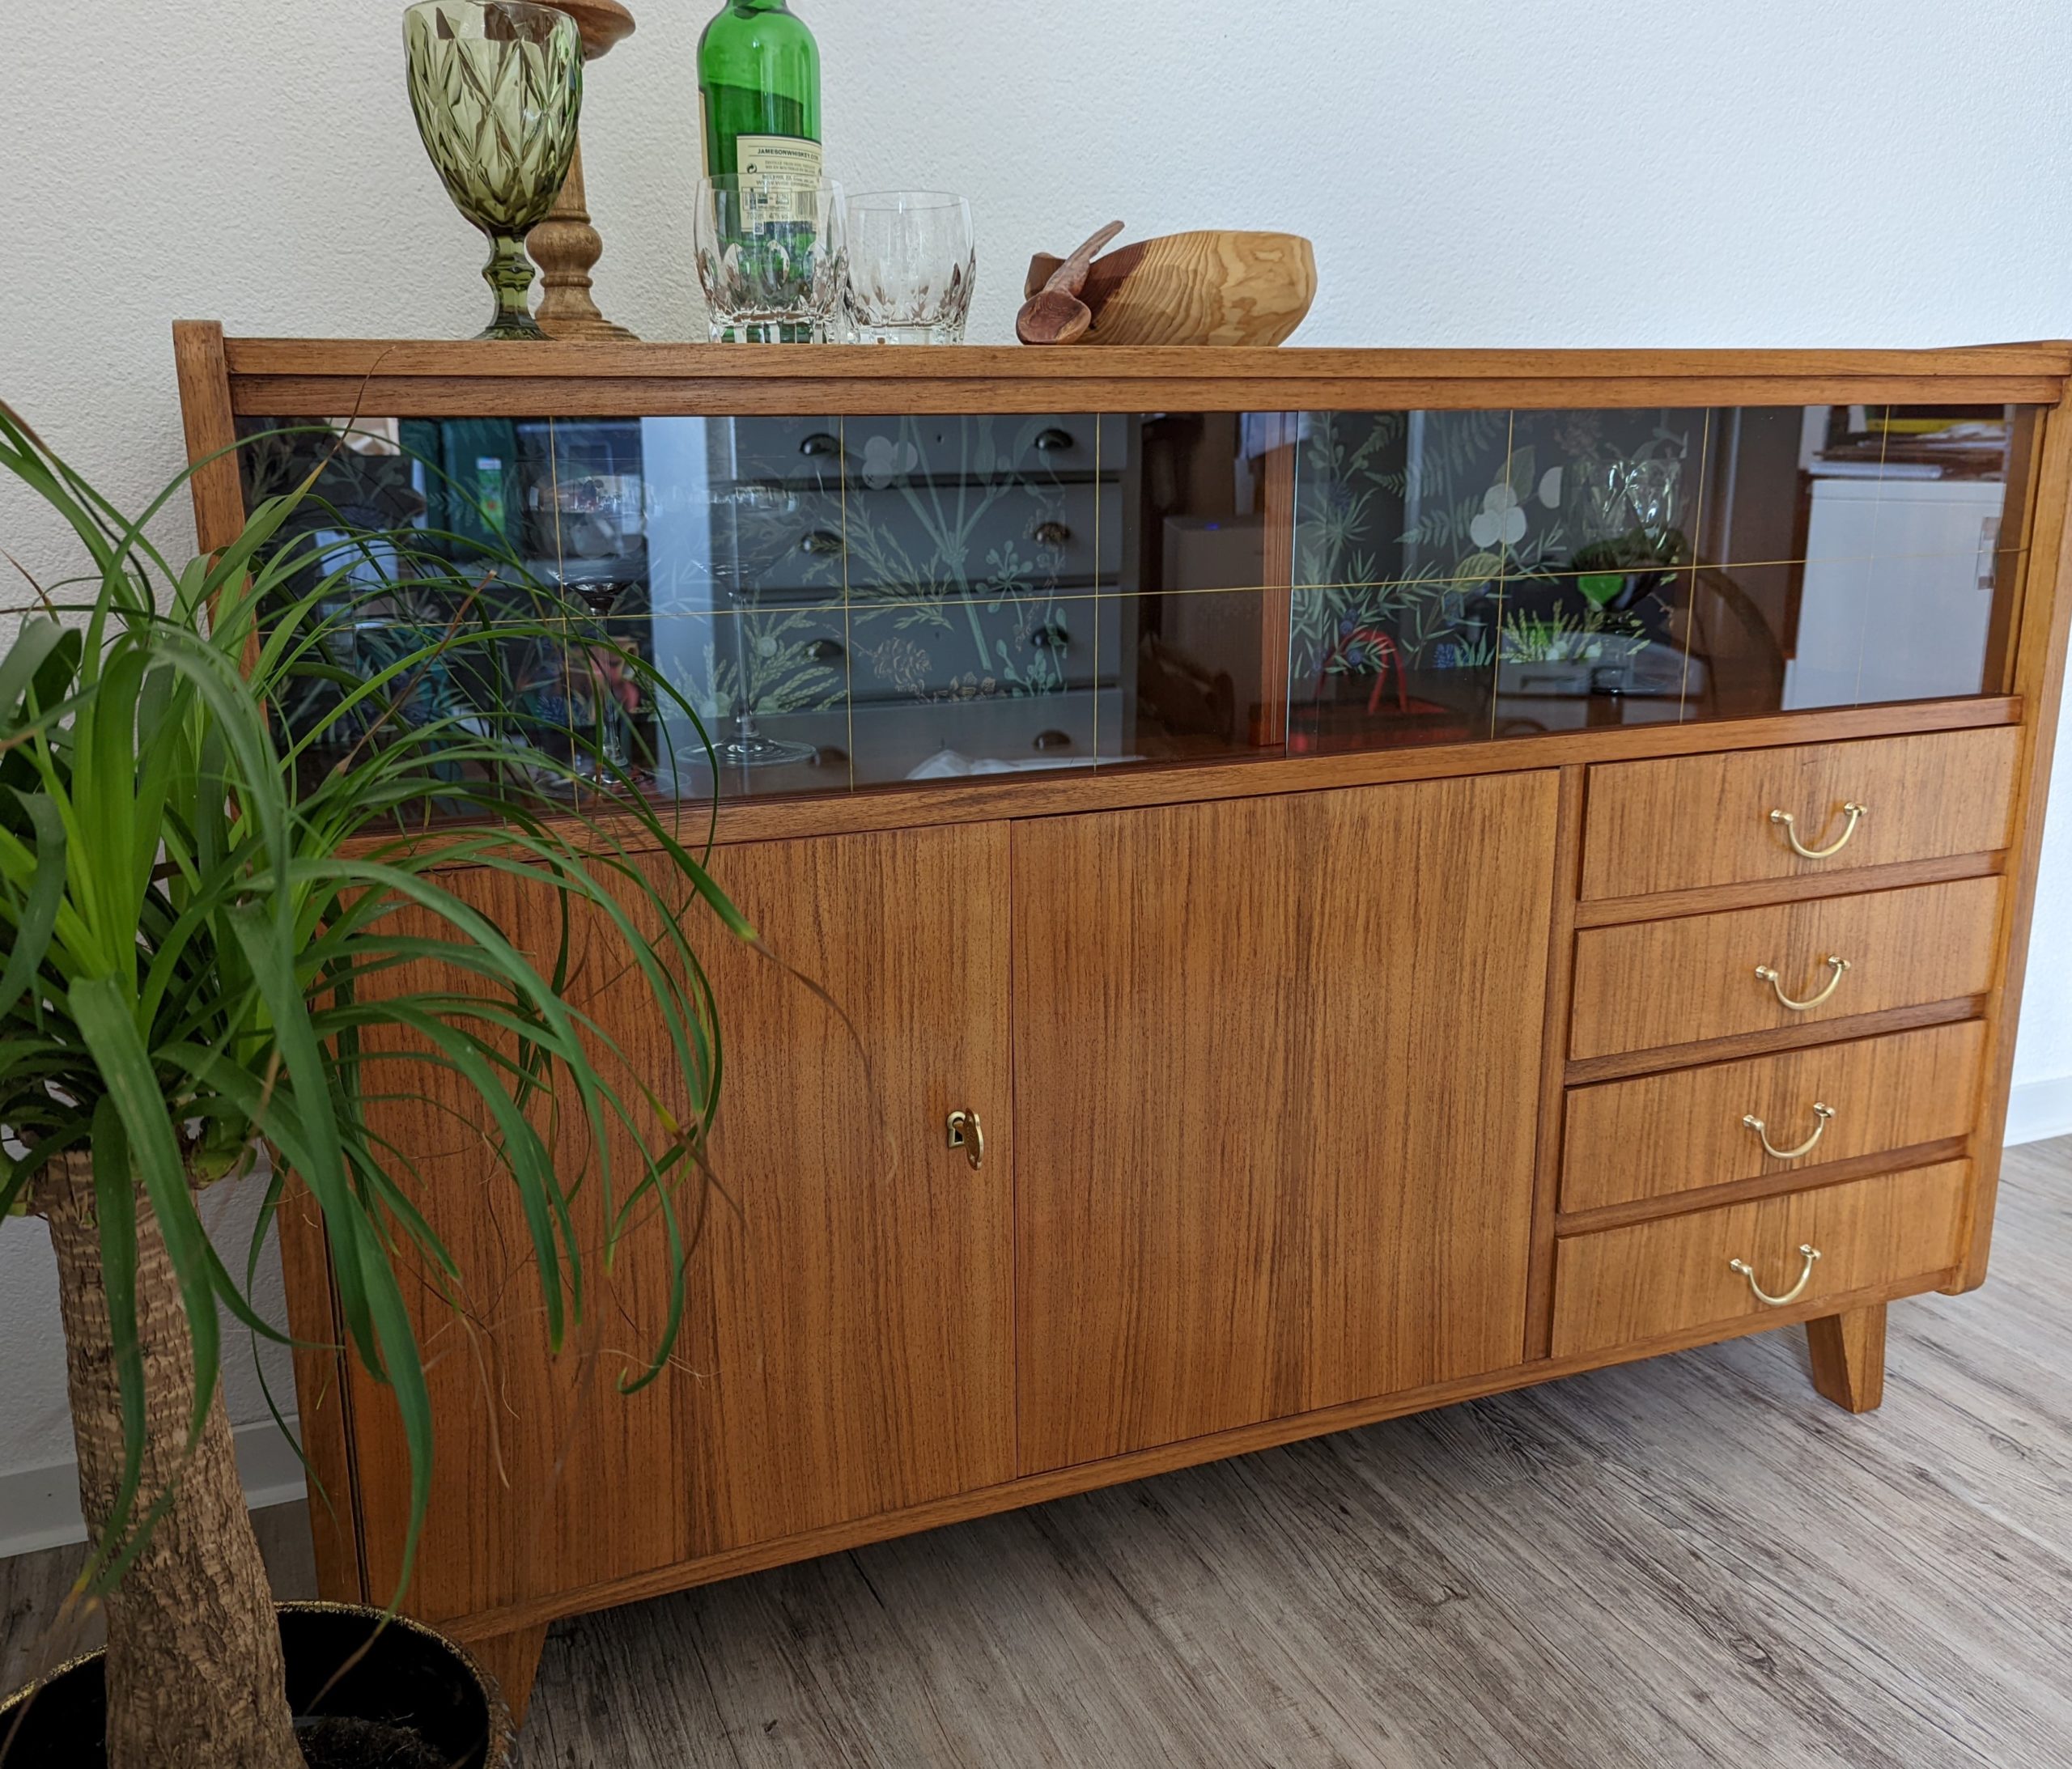 1950s Tepe Sideboard Refinished and Reimagined